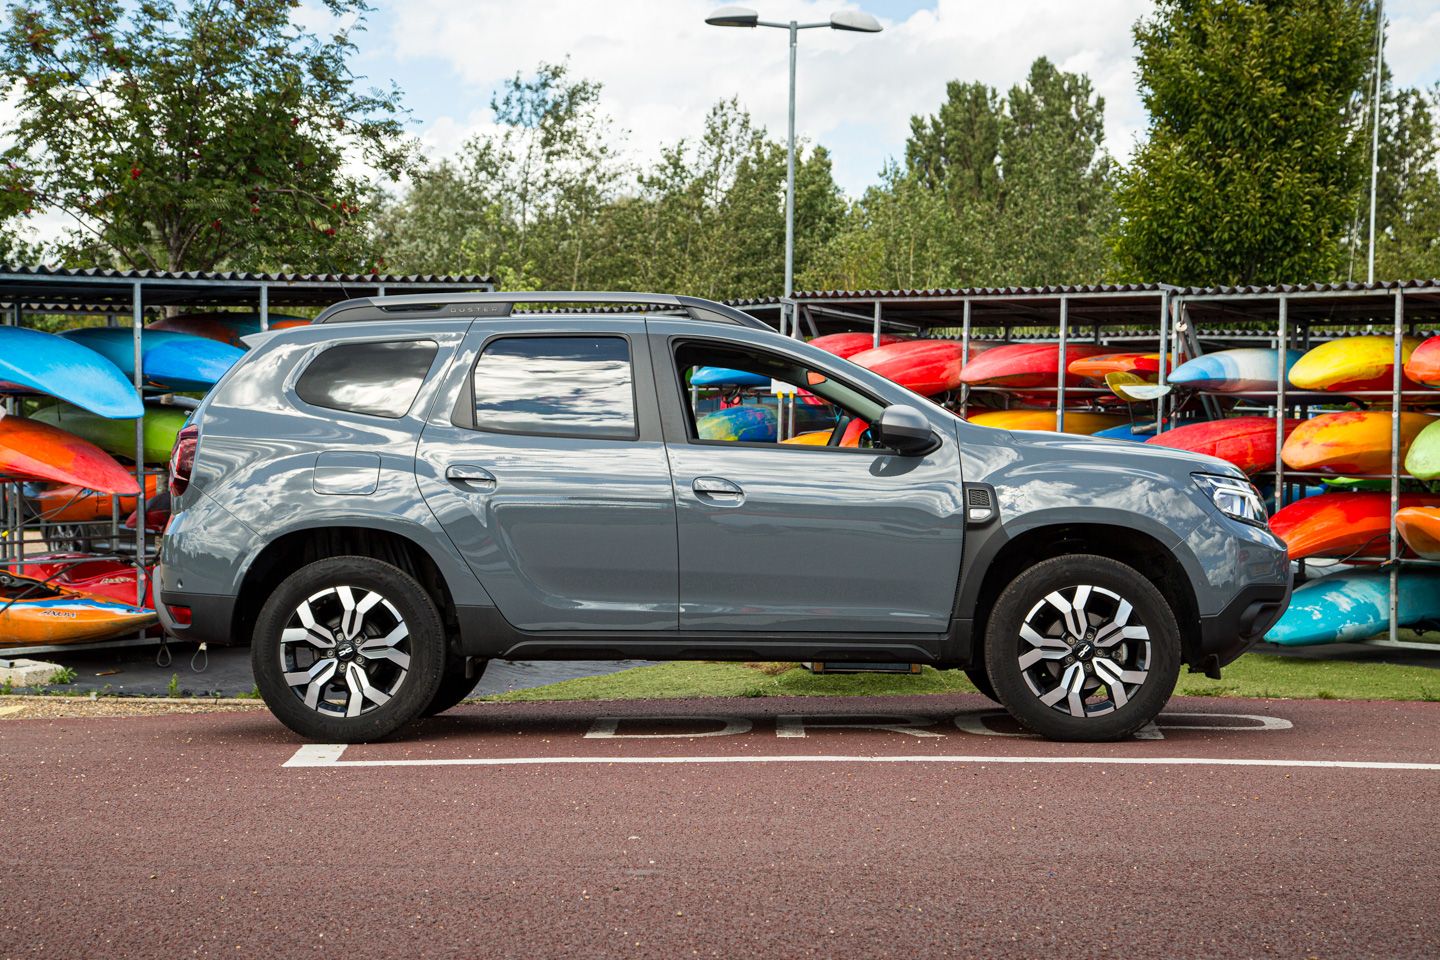 It's a brand new Dacia Duster!